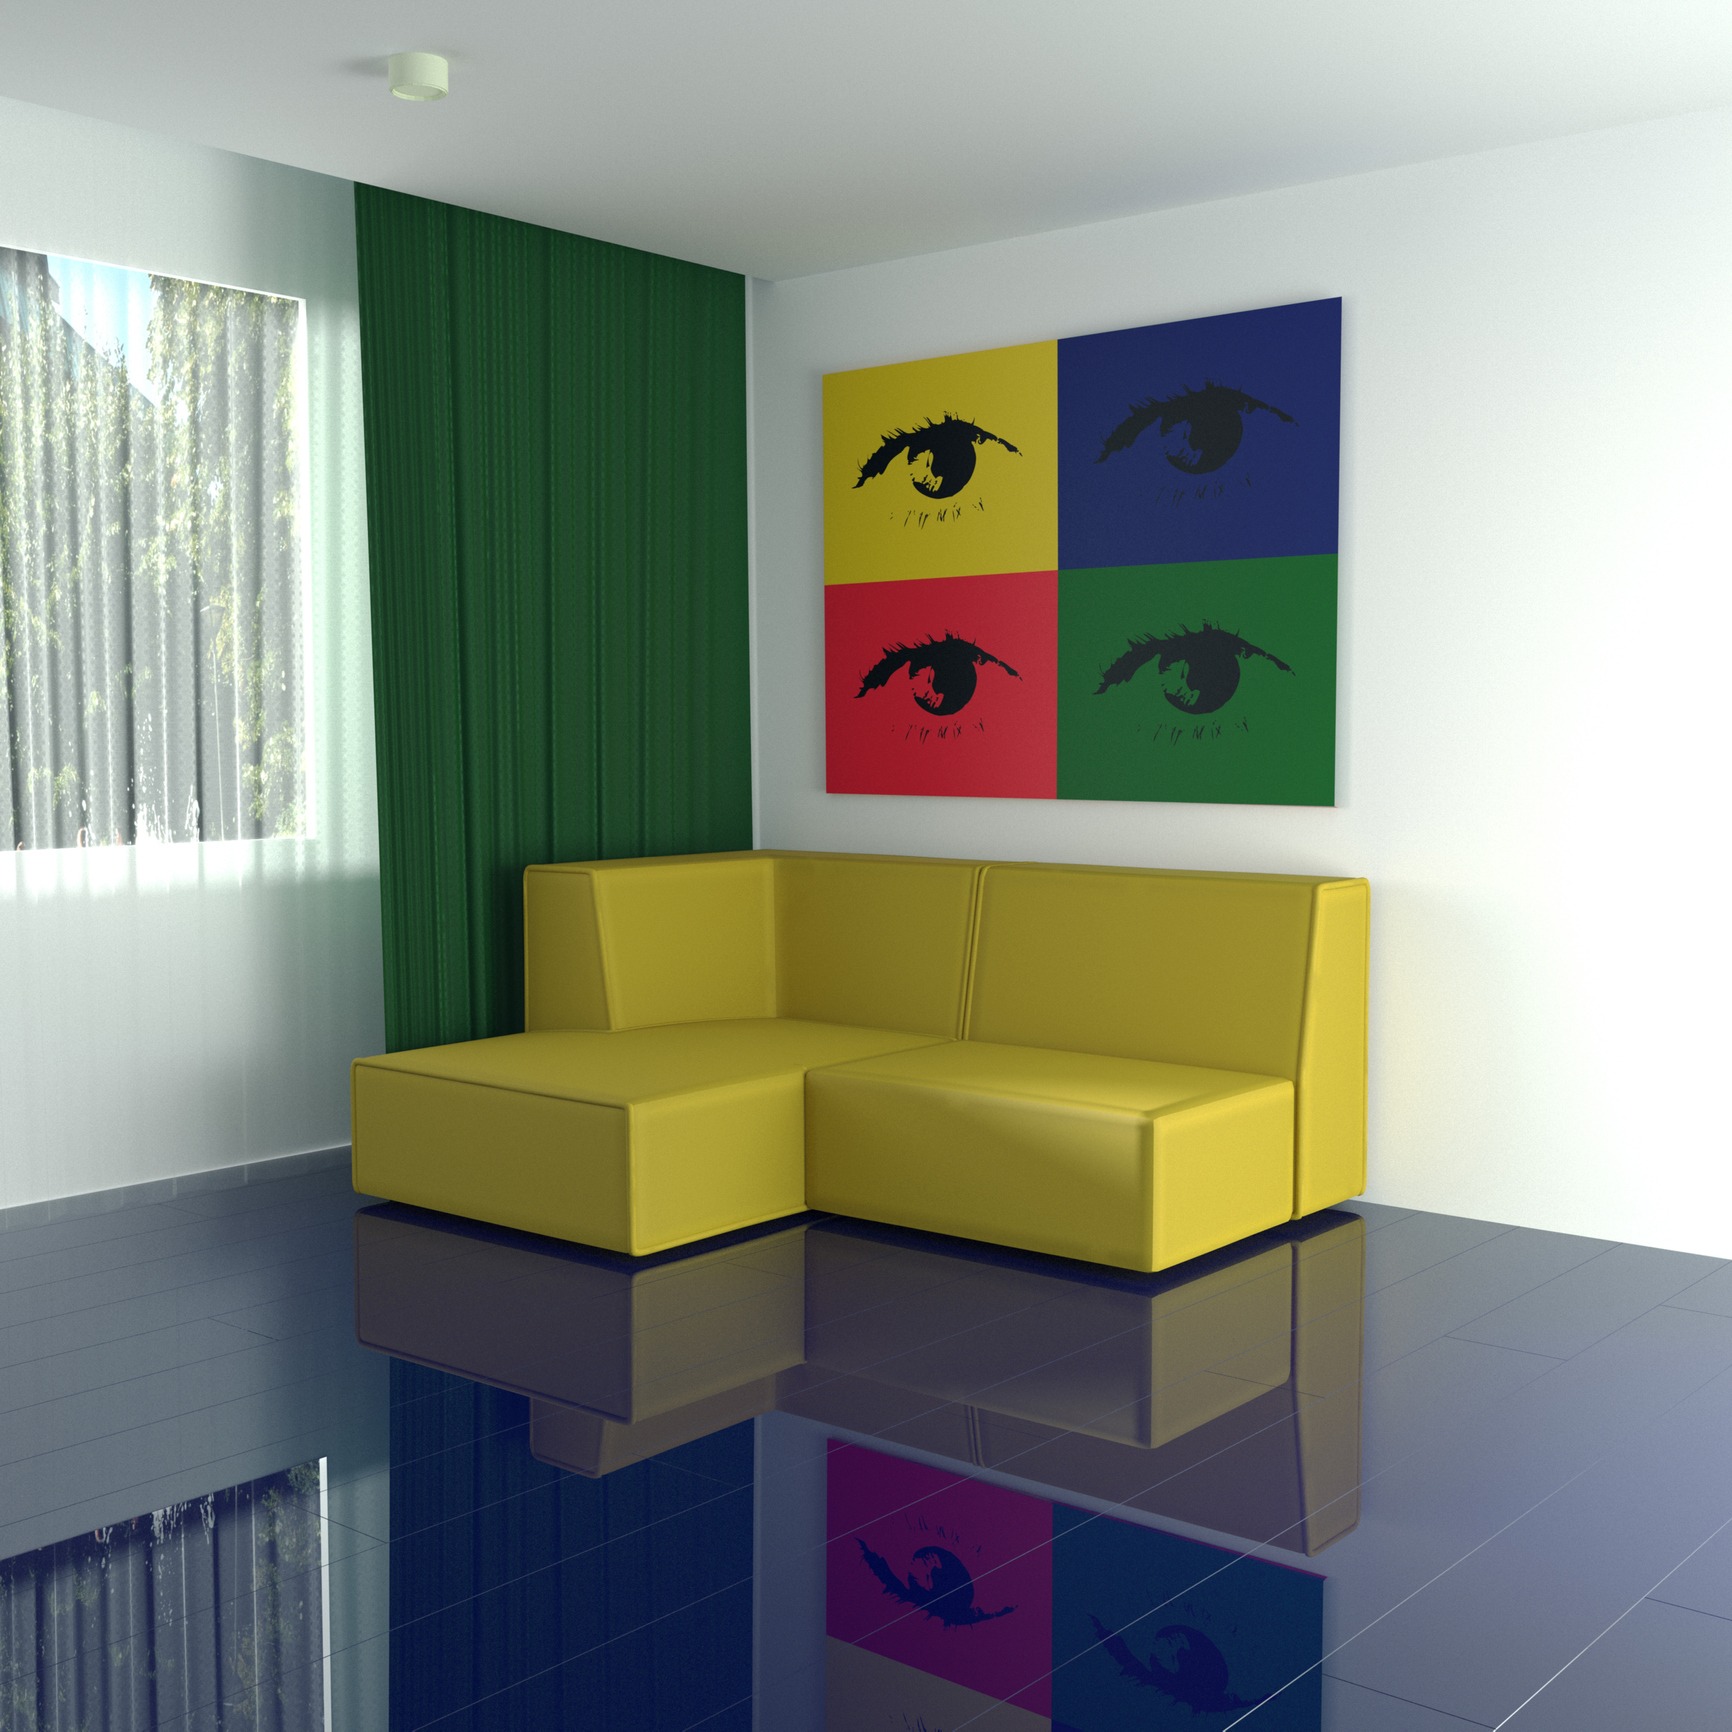 The interior of the room in bright colors with a picture in the style of pop art